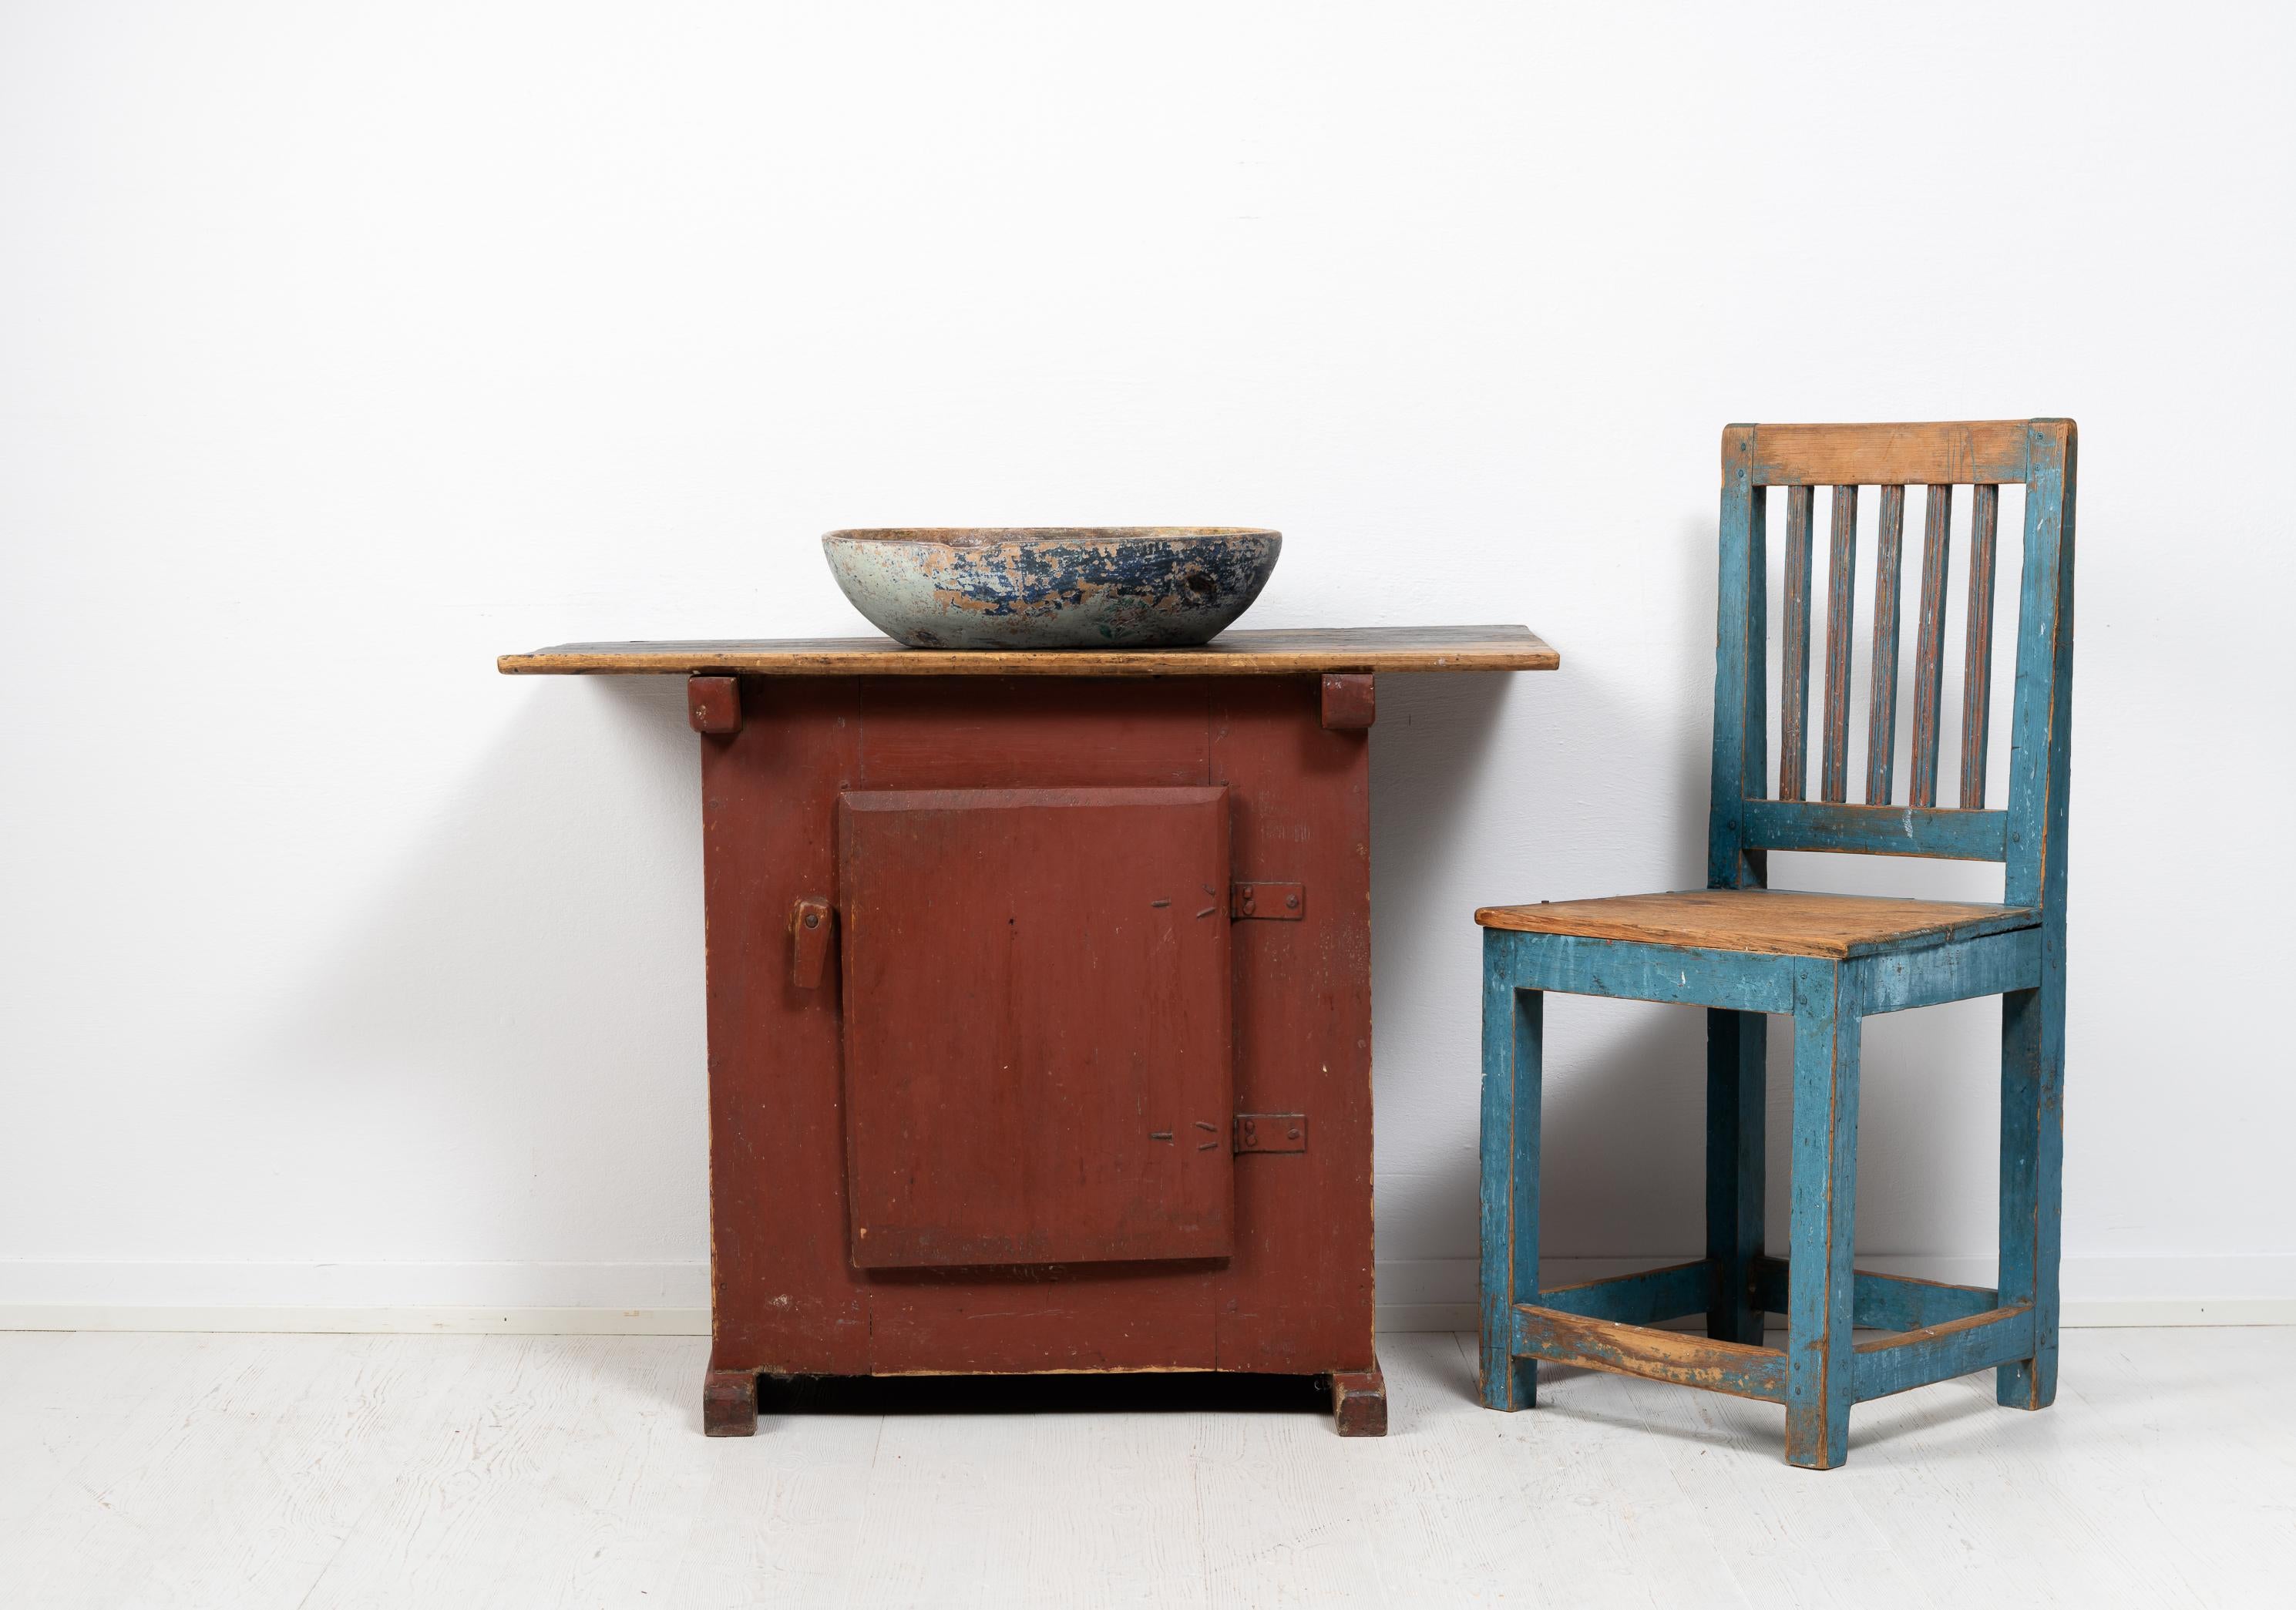 Small cabinet or side table in folk art from the late 1700s. The table is a naive rustic folk art furniture from Sweden and would work well as both a wall table, nightstand or as a small cabinet. It is painted pine with the original first layer of